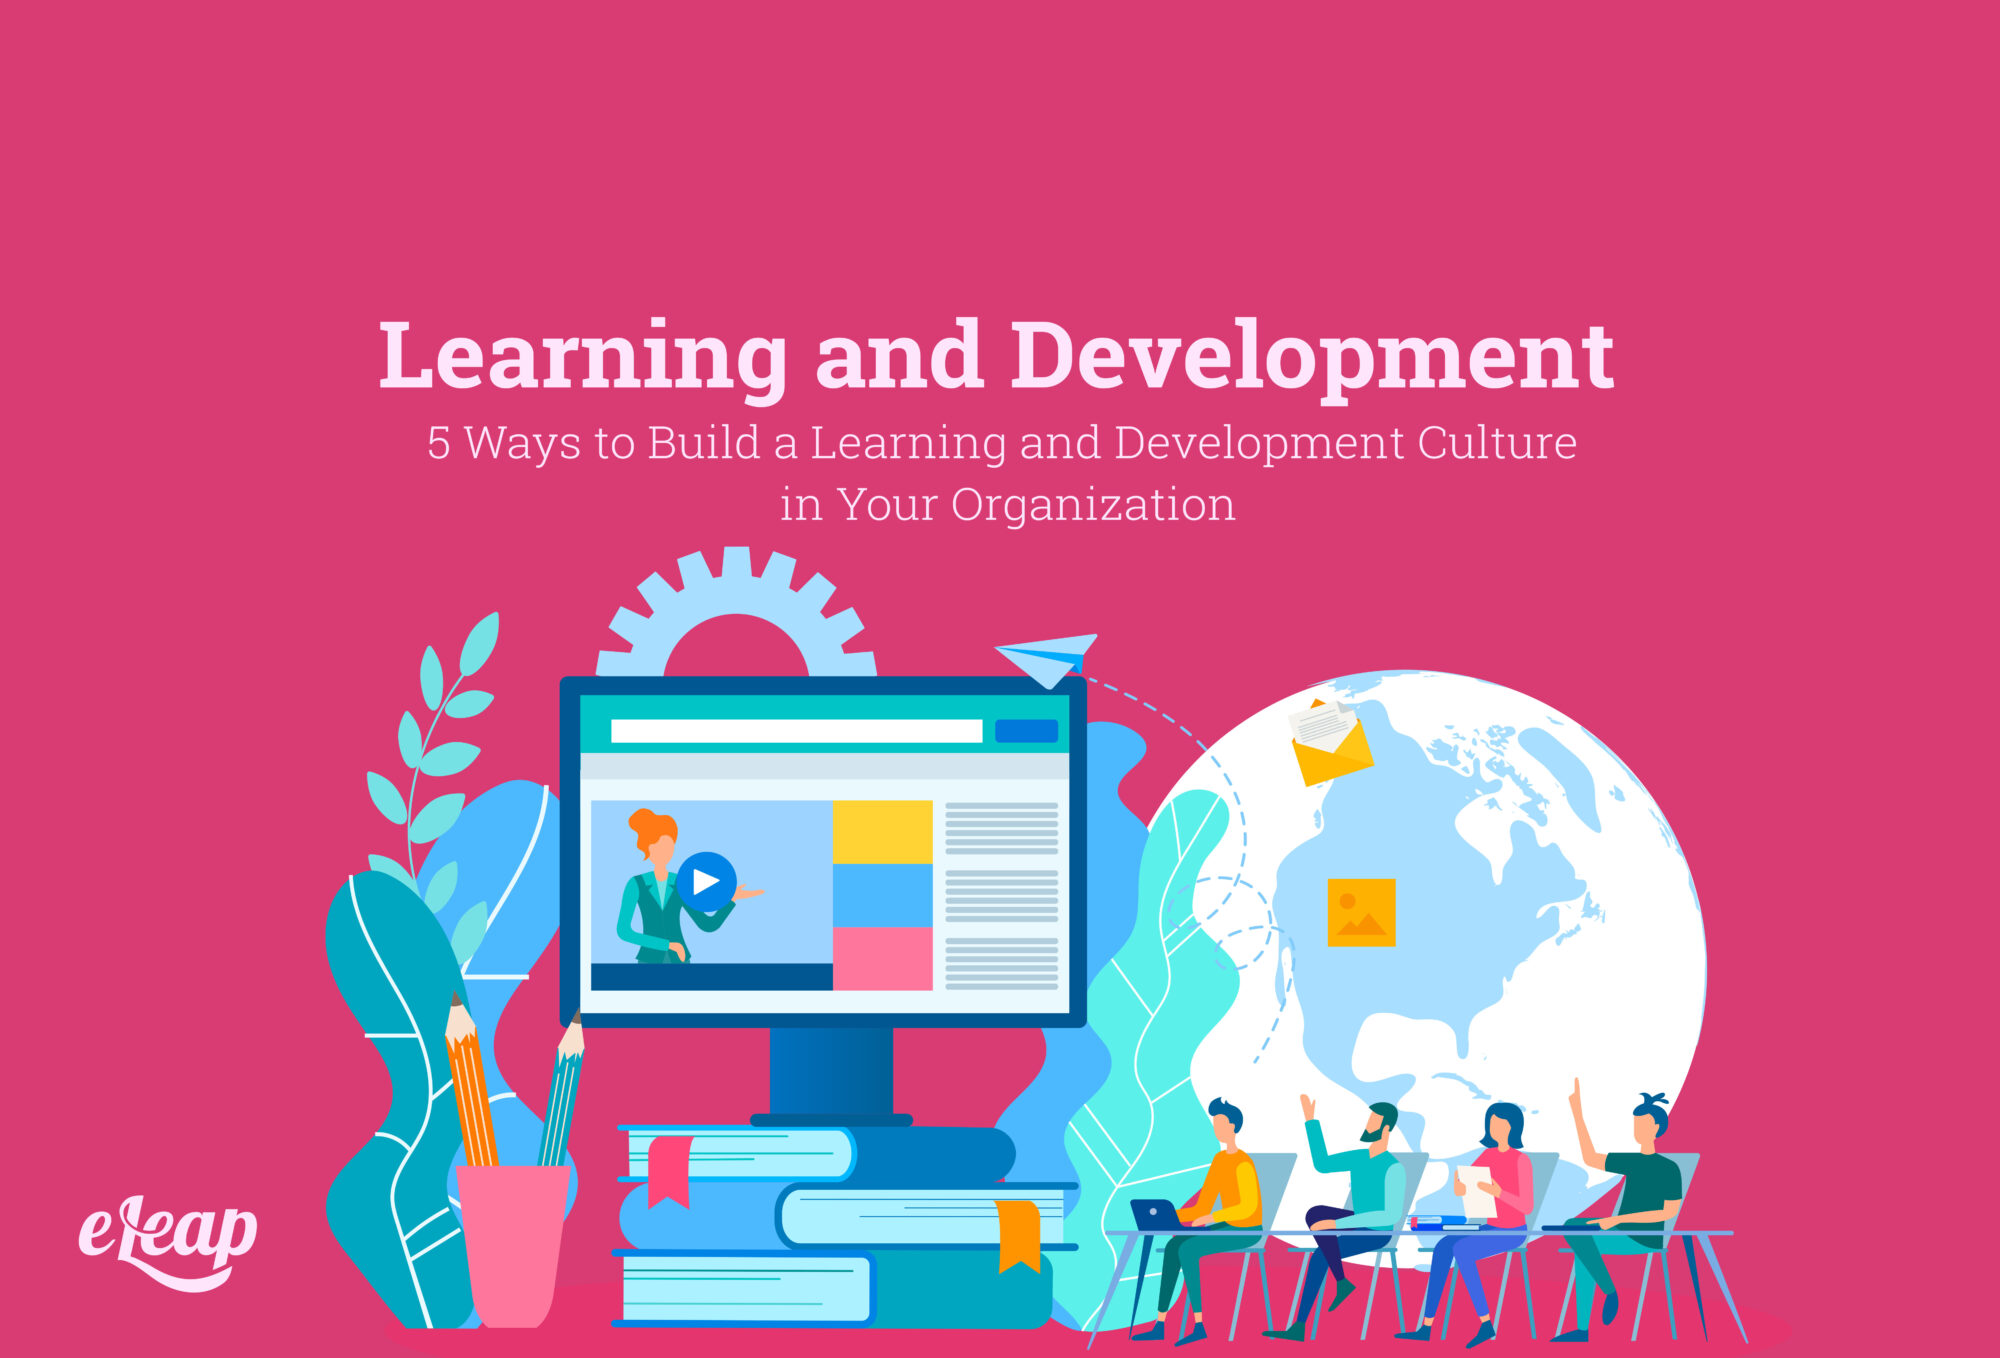 5 Ways to Build a Learning and Development Culture in Your Organization